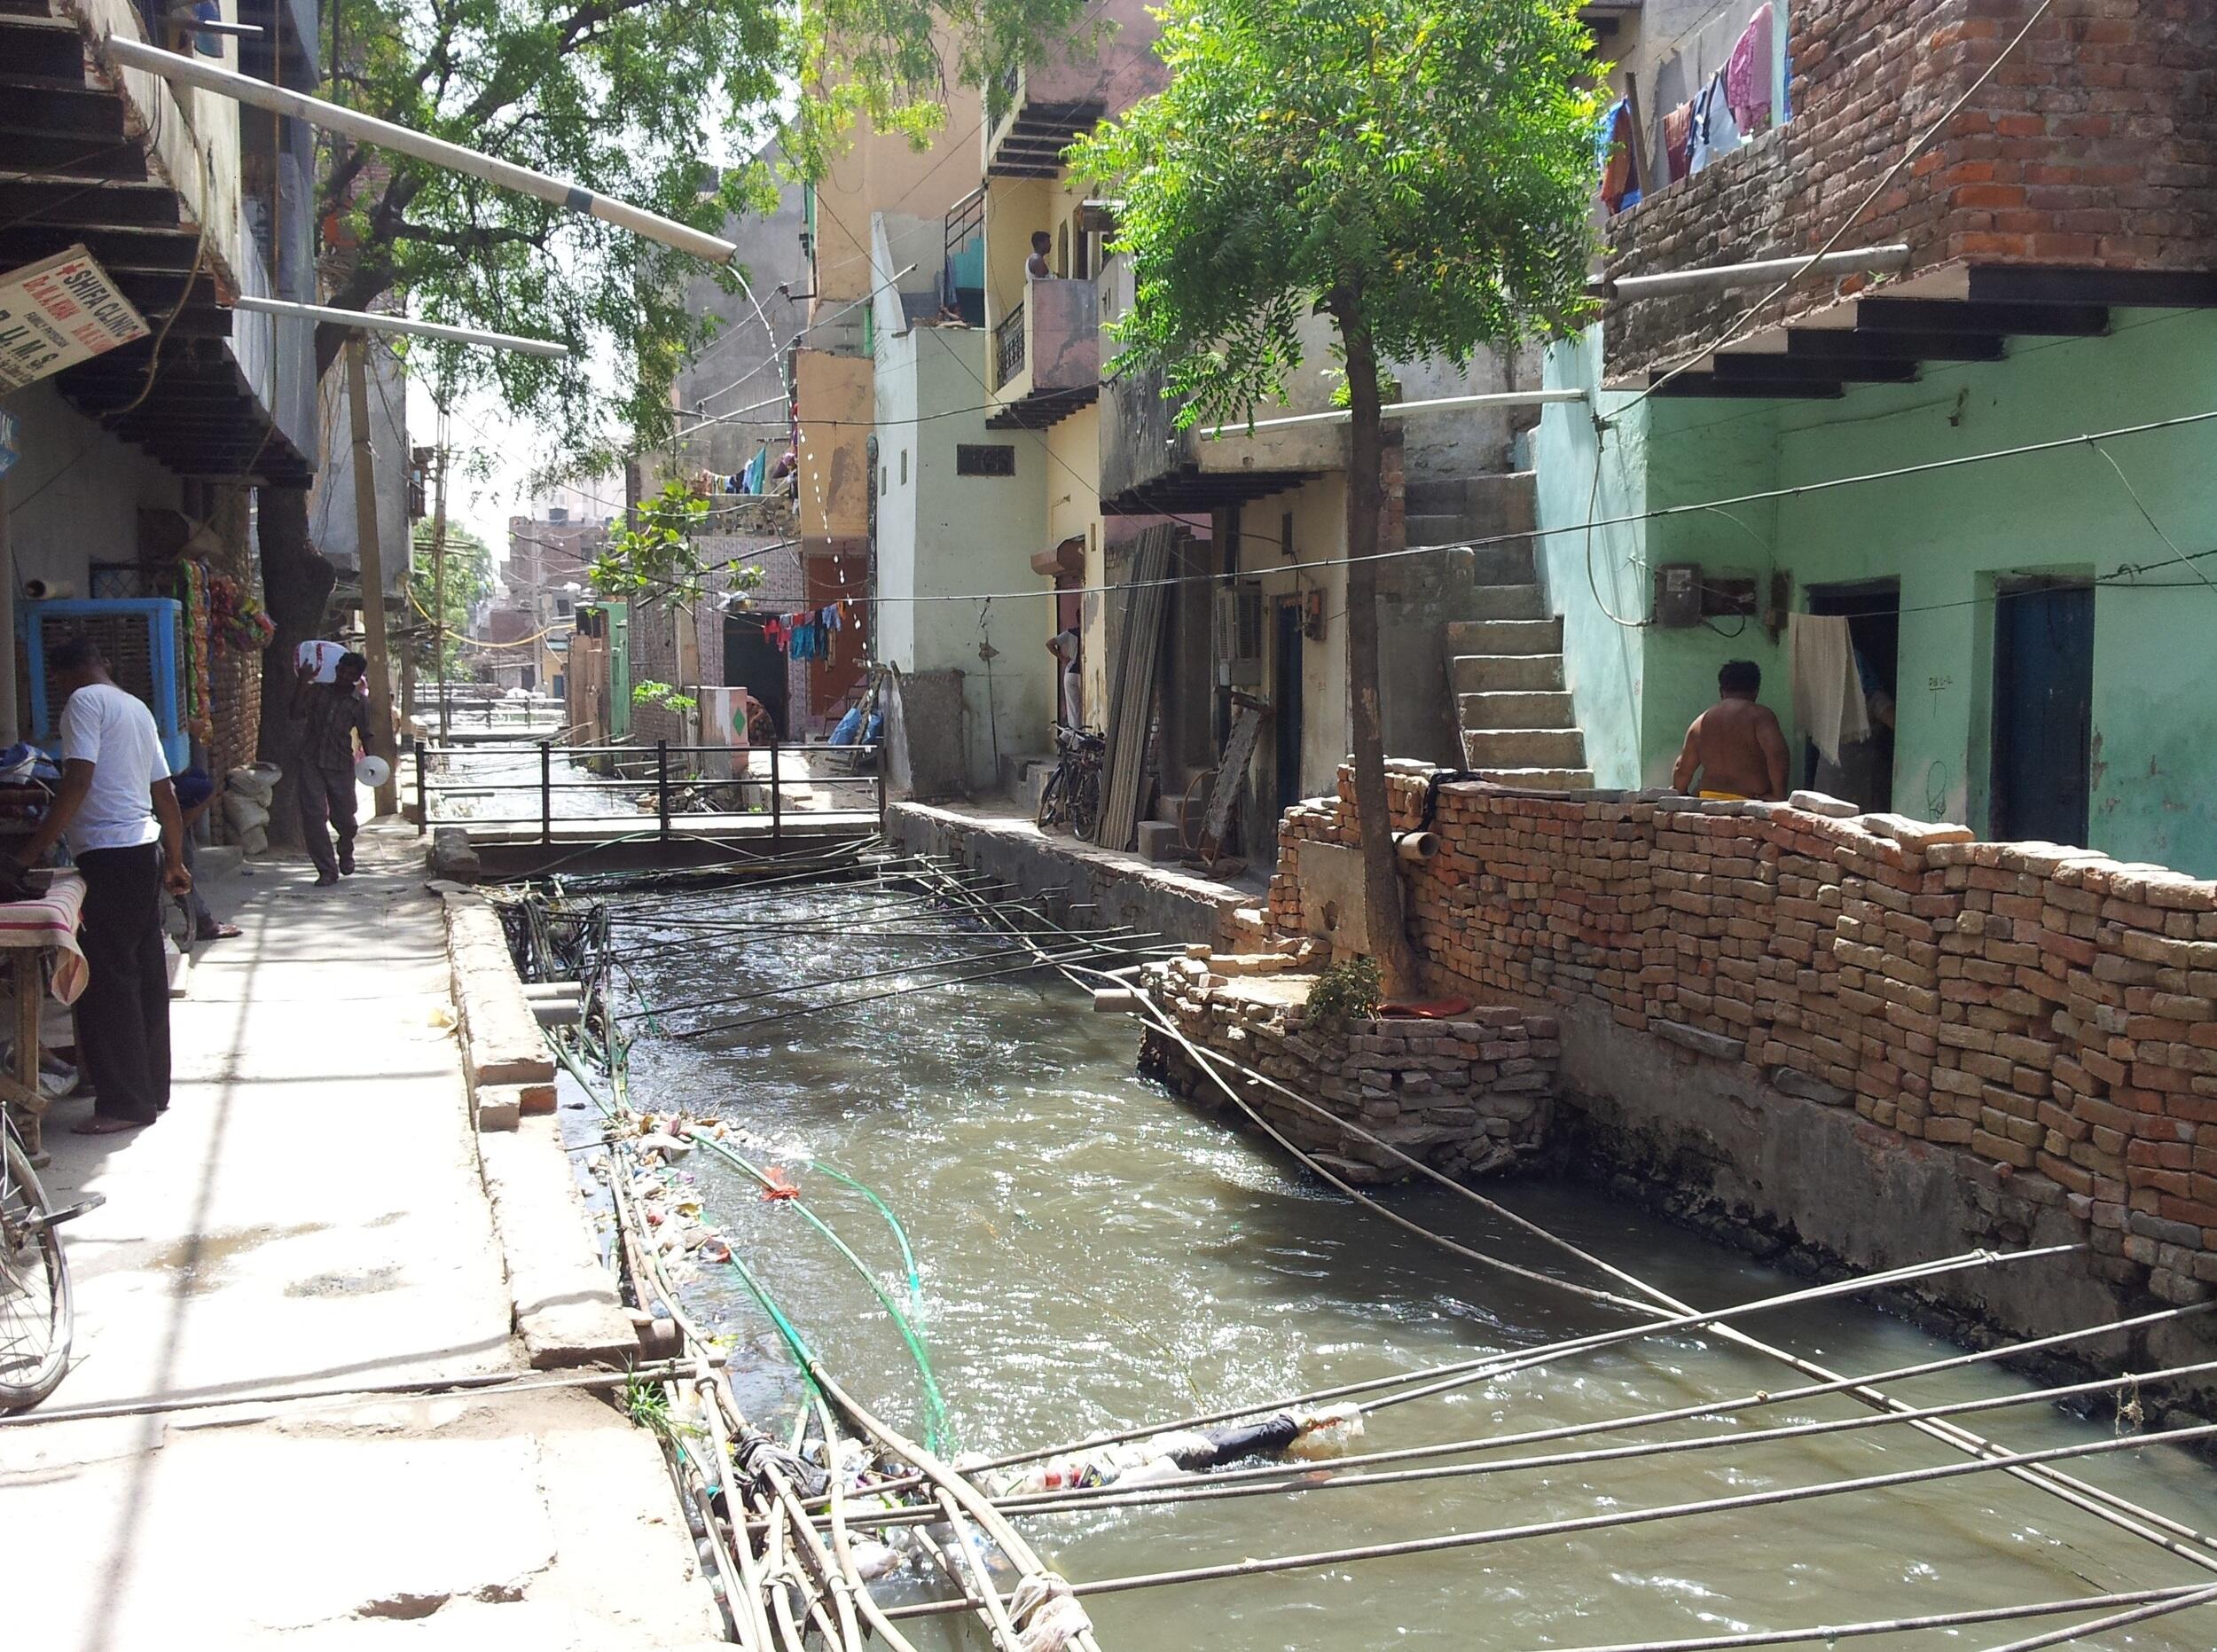 An improvised drain with sidewalks on both sides and trees hanging over it in India.